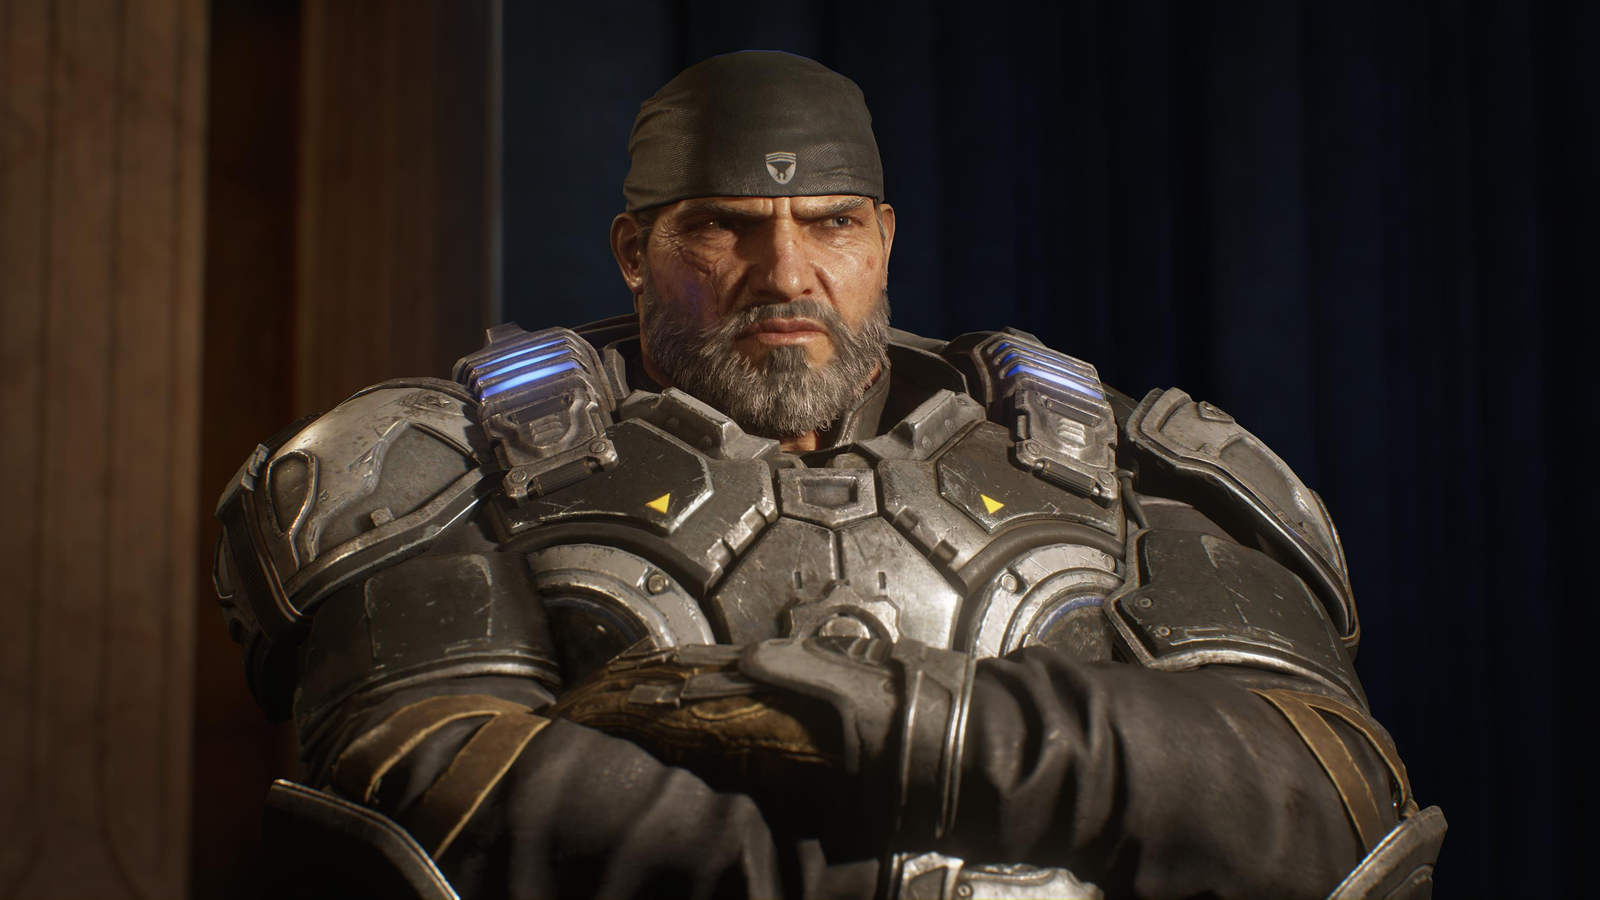 Gears 5 requires Xbox Live login on Steam, PC specs revealed